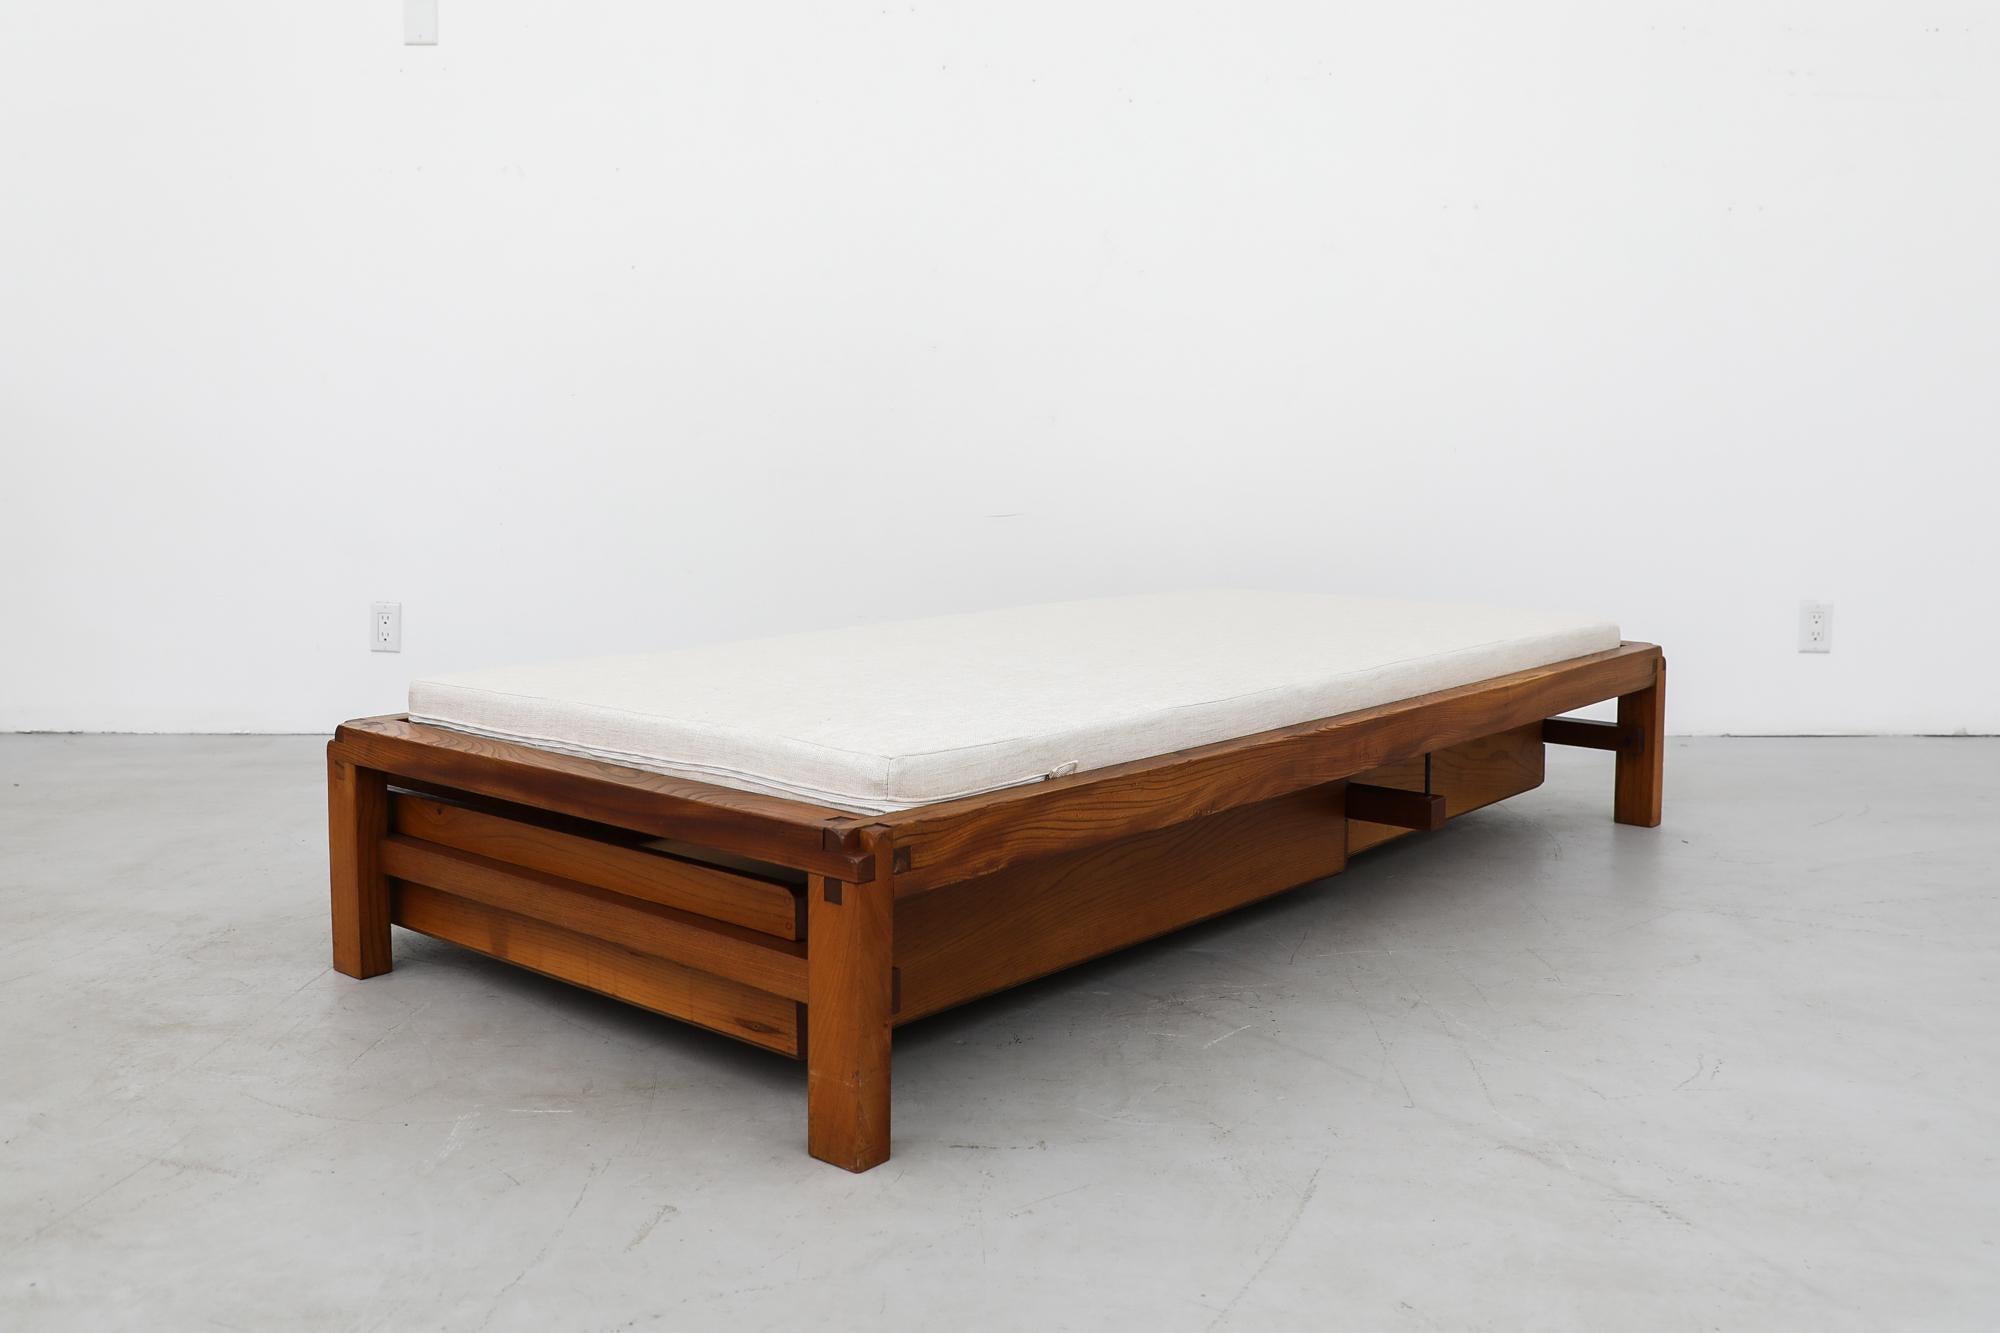 Pierre Chapo 'L03' Daybed in Elm with Storage & Newly Made Mattress, 1960s For Sale 3